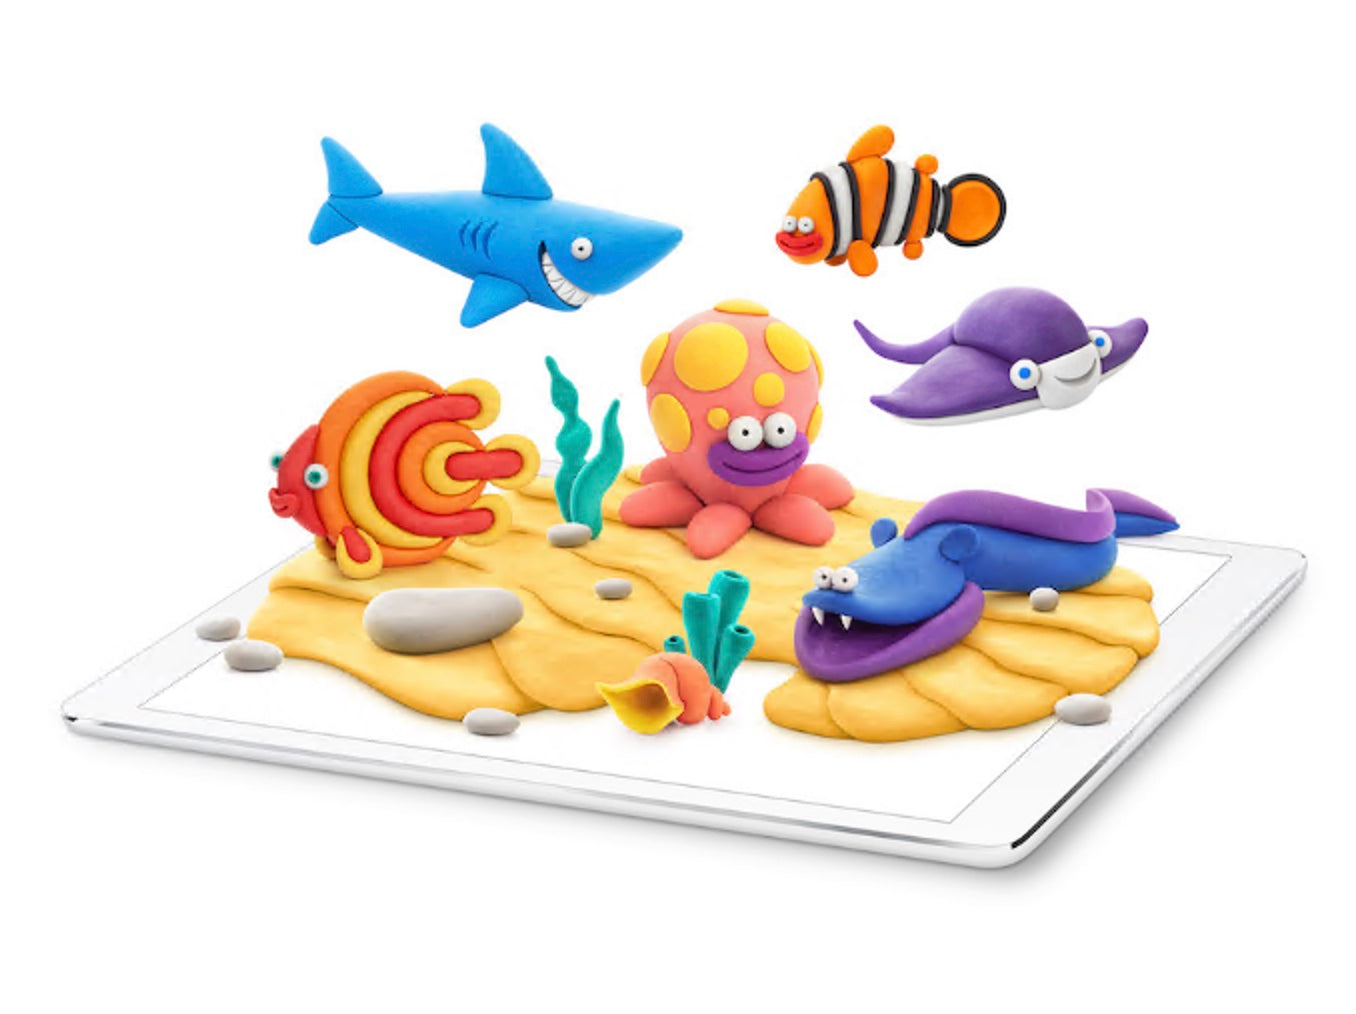 Fat Brain Toys - Hey Clay (Ocean, Monsters, Animals, and Dinos)